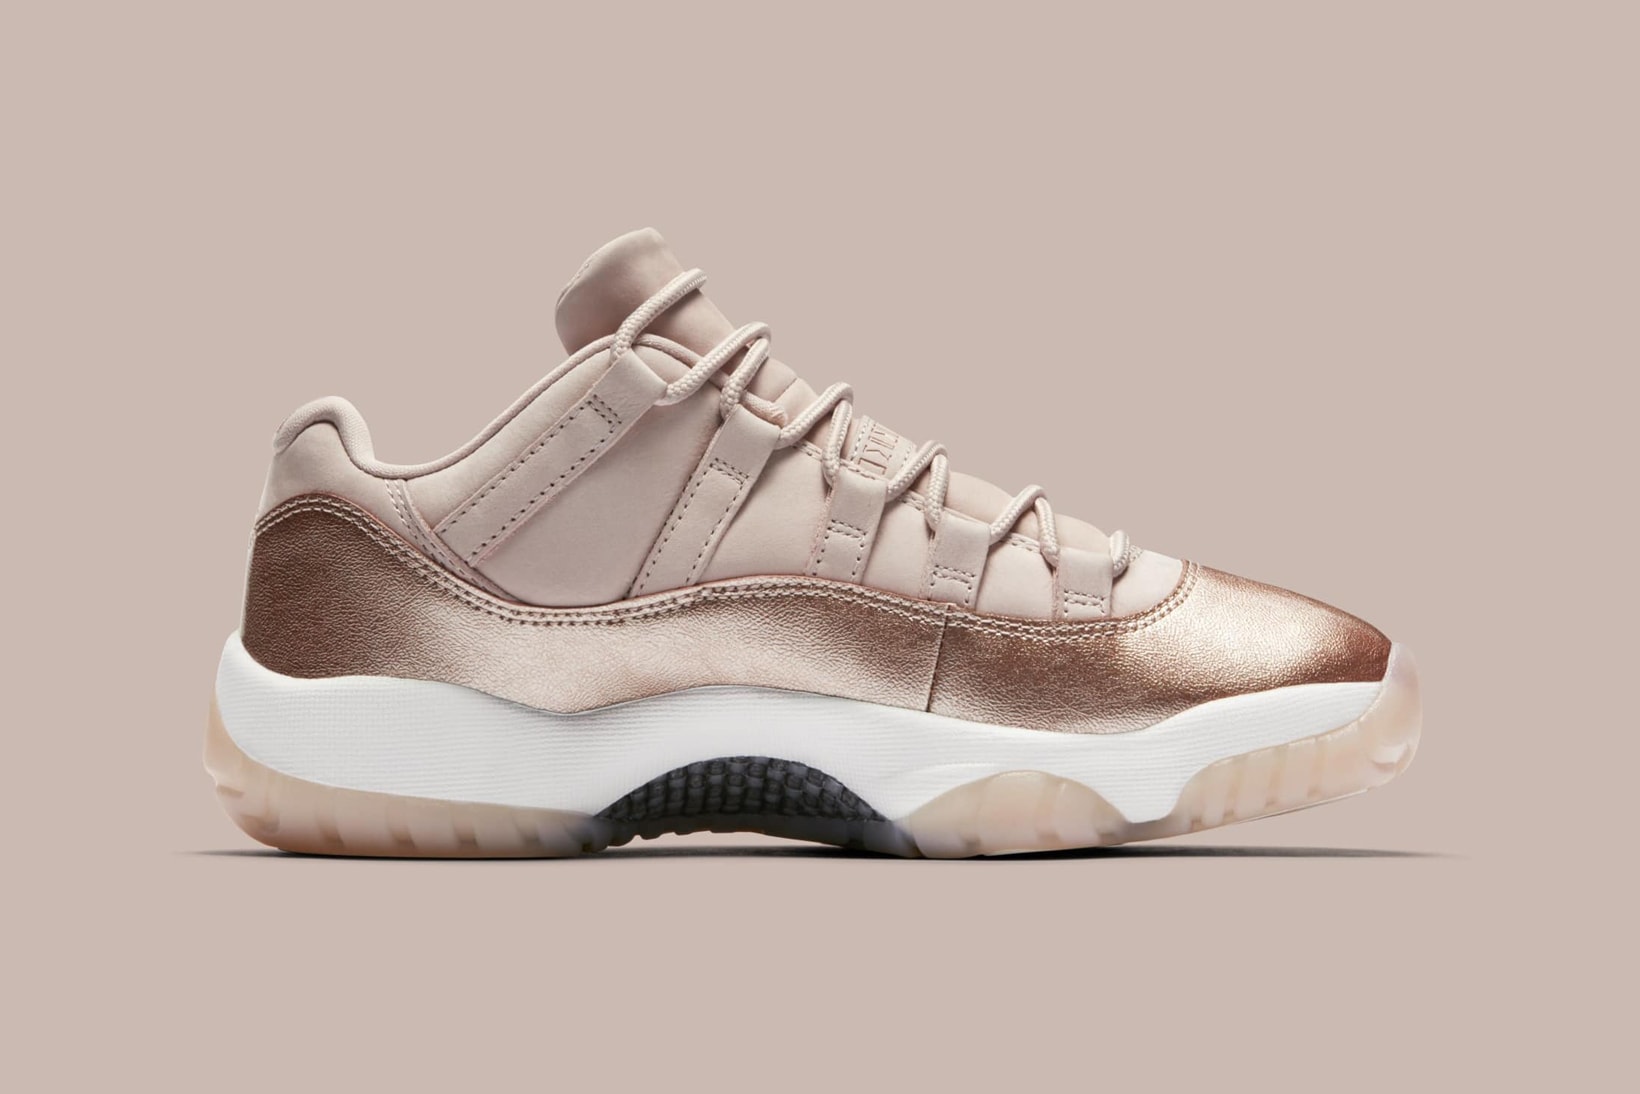 Is This the 'Easter' Colorway Of the Air Jordan 11 Low?